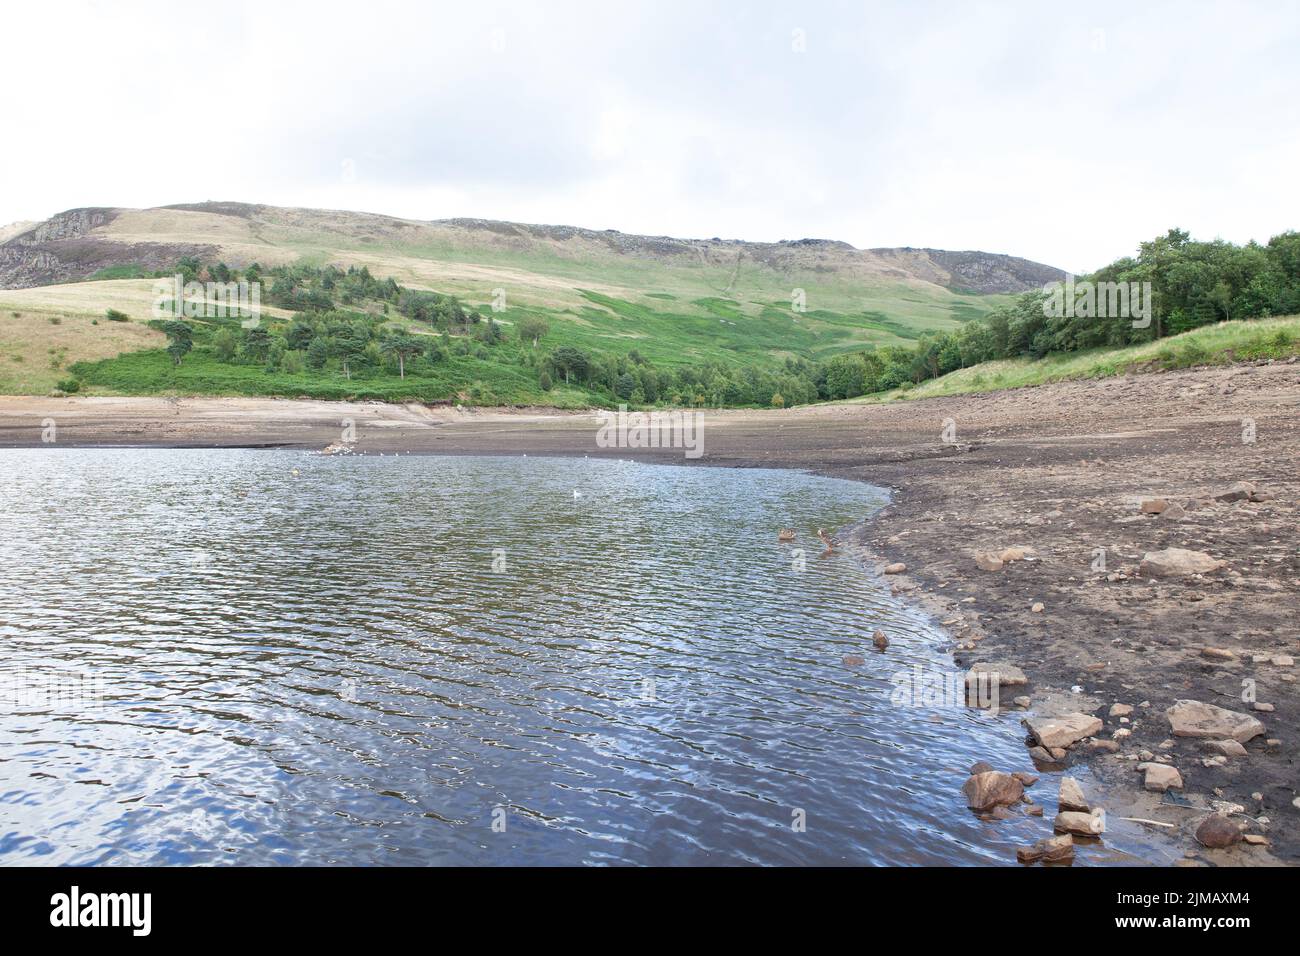 UK Weather 5.8.2022 Dovestone Reservoir Greenfield Saddleworth UK The lack of rainfall over recent weeks has left Dovestone Reservoir at an alarmingly low level of water revealing rocks that are usually unseen. Credit: Peter Liggins/Alamy Live News Stock Photo